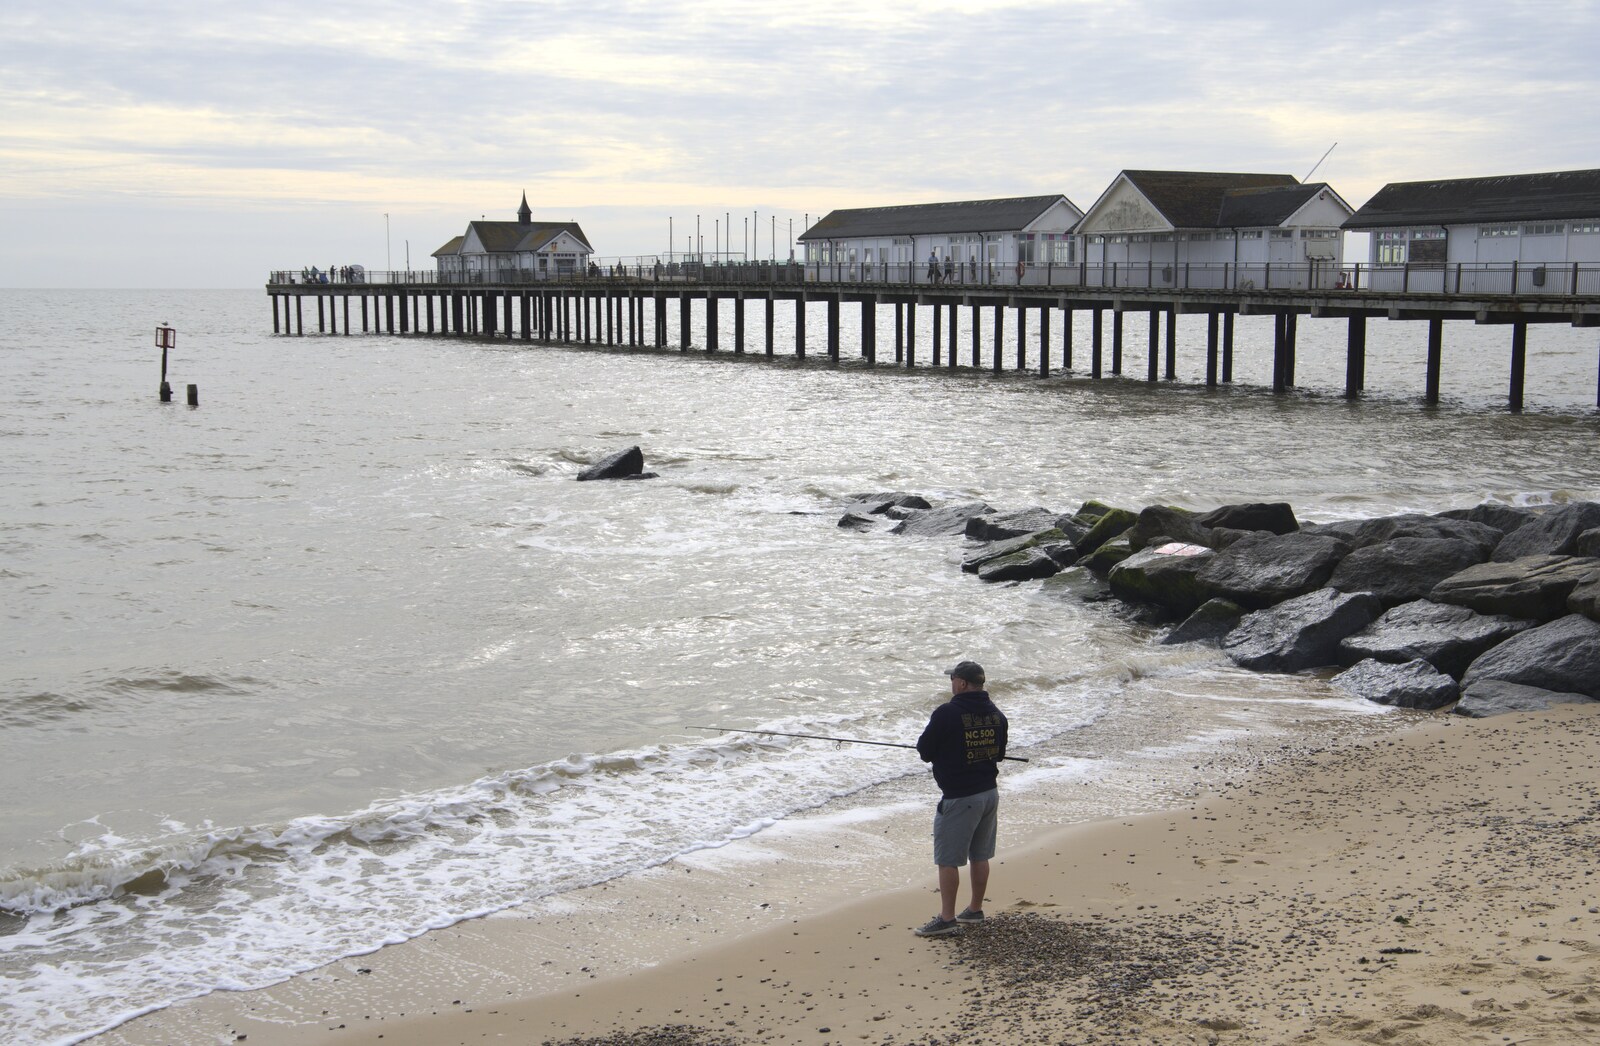 Some dude does a bit of fishing by the pier from The Waverley Paddle Steamer at Southwold Pier, Suffolk - 27th September 2023